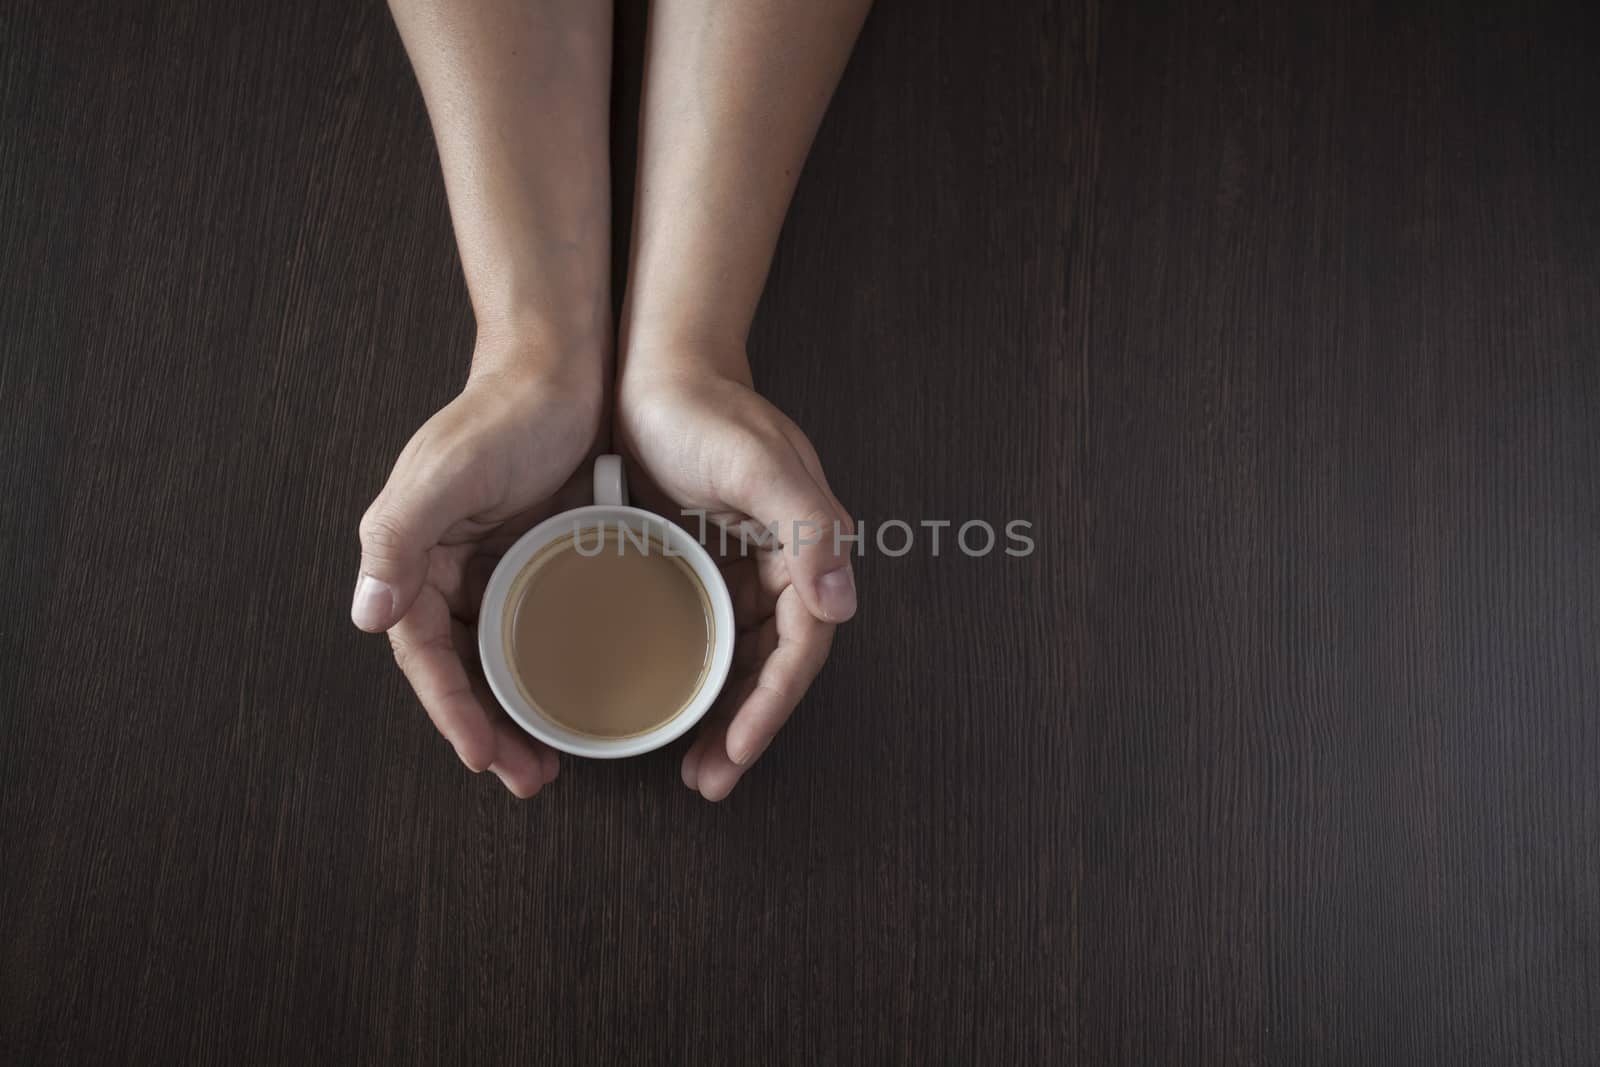 Cup of coffee by snep_photo